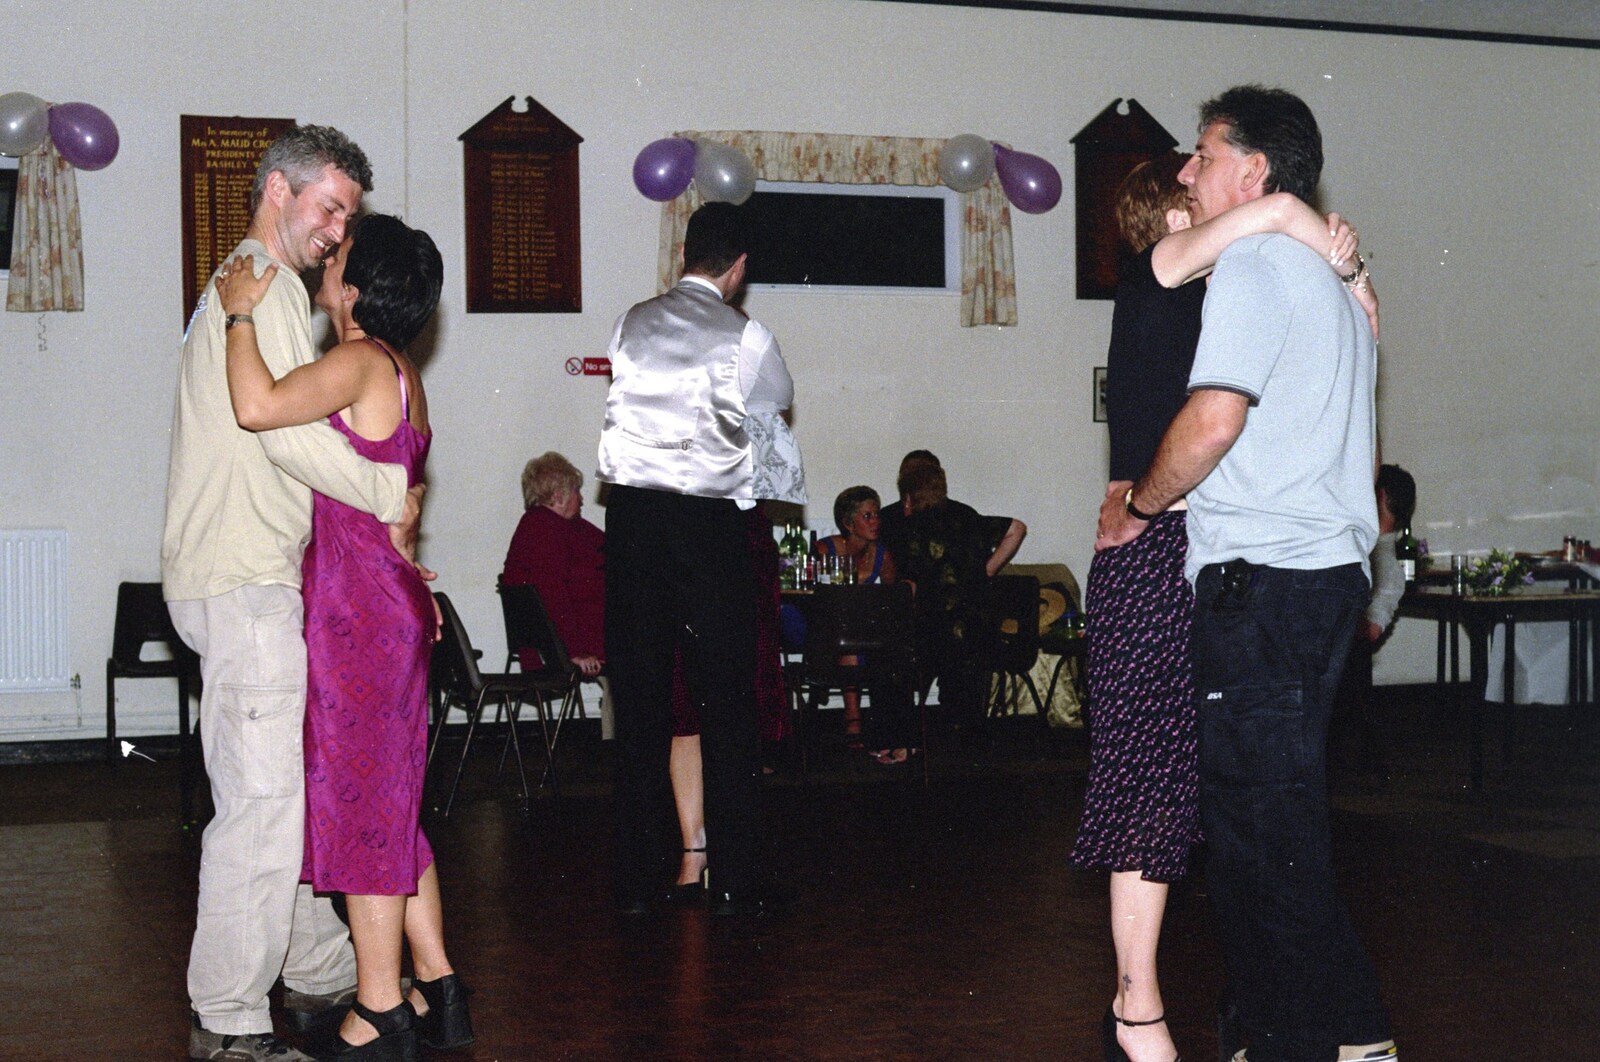 More wedding dancing from Sean and Michelle's Wedding, Bashley FC, New Milton - 12th August 2000